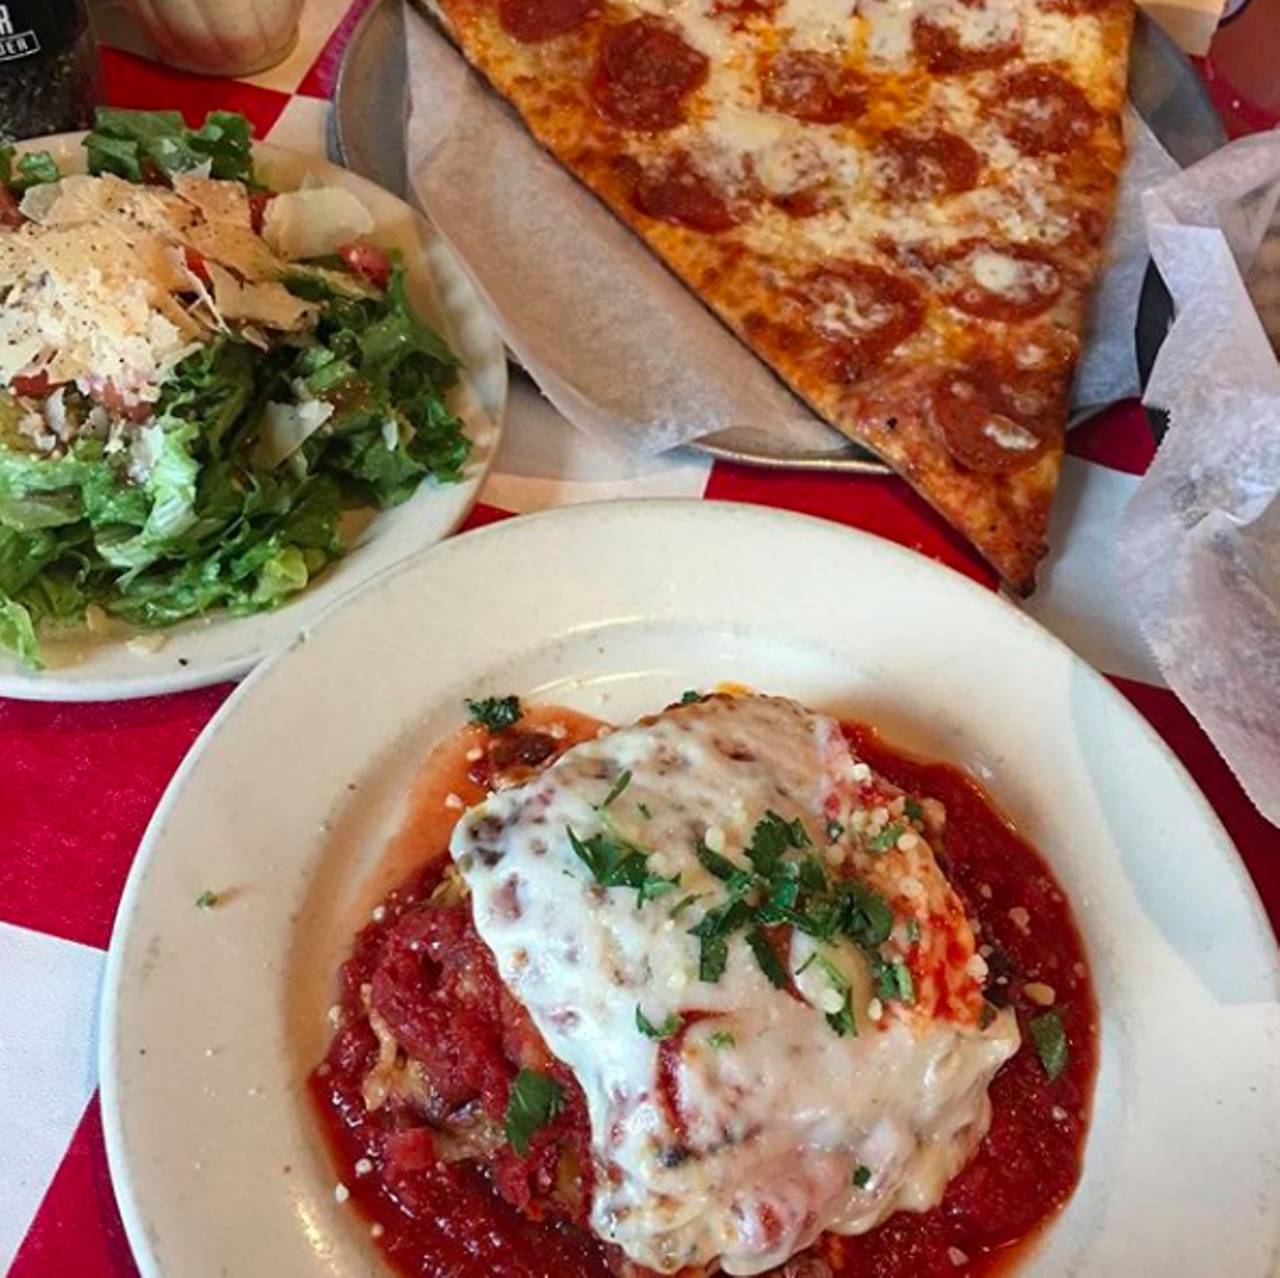 Julian’s Italian Pizzeria & Kitchen
Multiple locations, julianspizzeria.com
With one location in Alamo Heights and another on West Ave., Julian’s is still growing and making a presence in San Antonio since opening in 2006. Taste the homemade and made-to-order dishes and you’ll see why Julian’s is on the up.
Photo via Instagram / princesslippylip